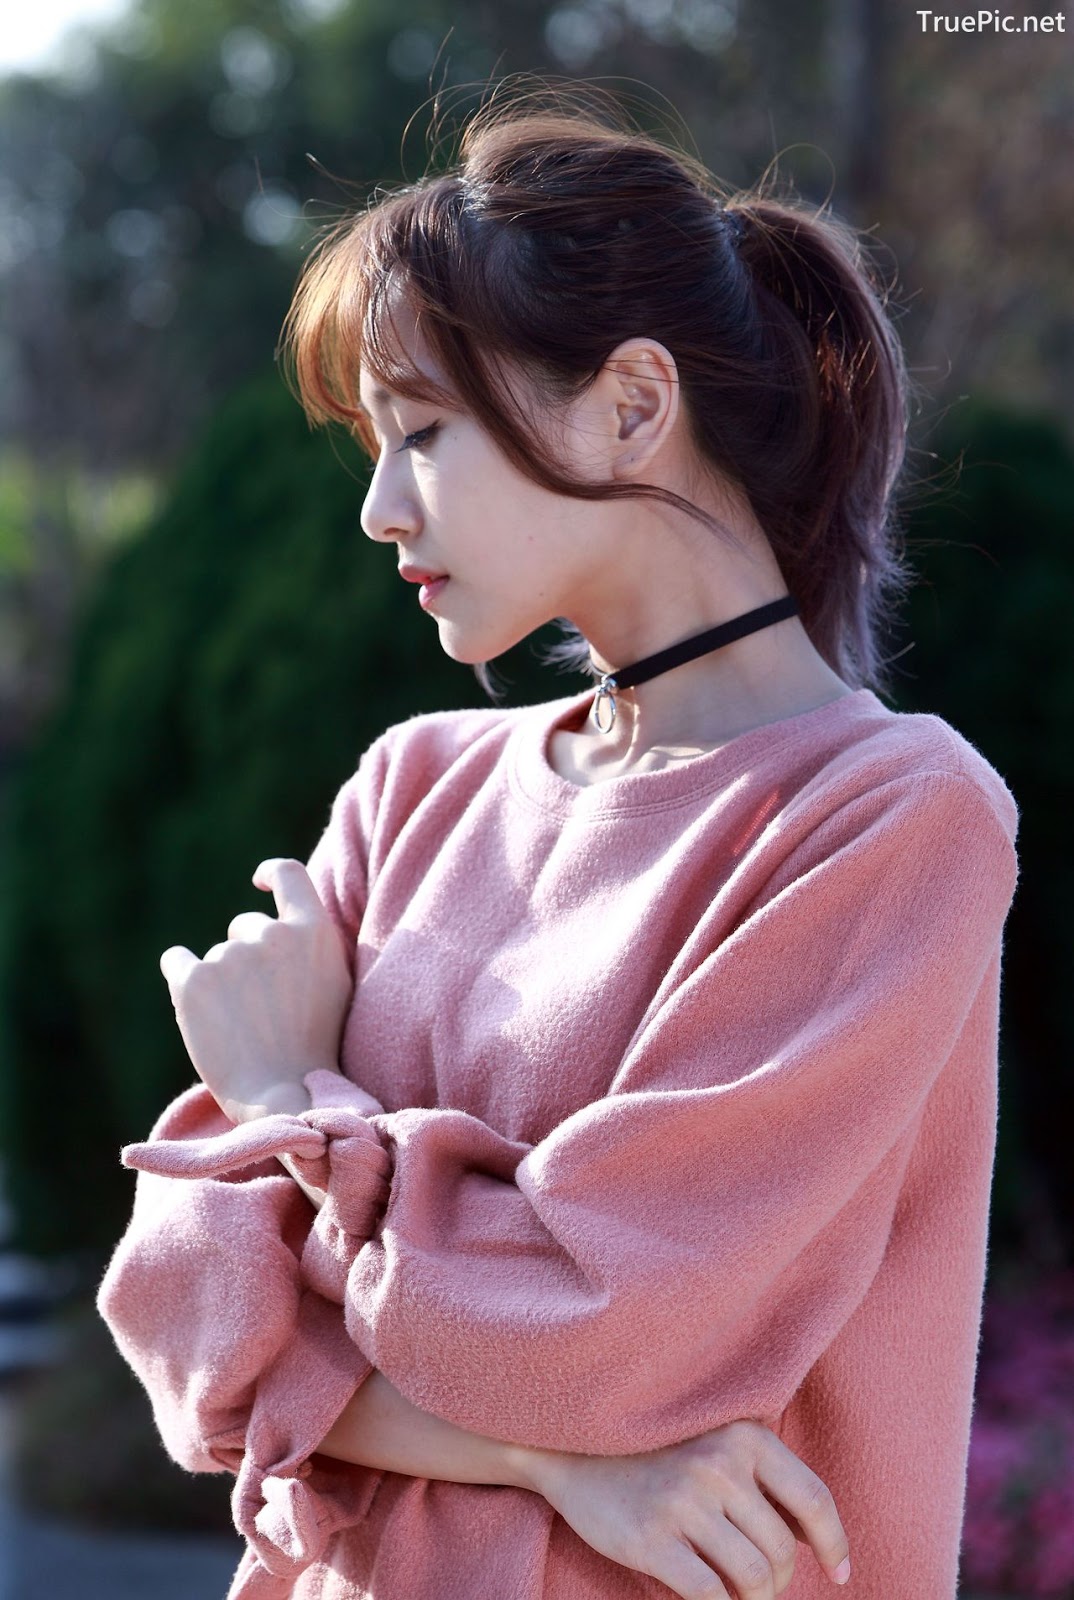 Image-Taiwanese-Model-郭思敏-Pure-And-Gorgeous-Girl-In-Pink-Sweater-Dress-TruePic.net- Picture-62